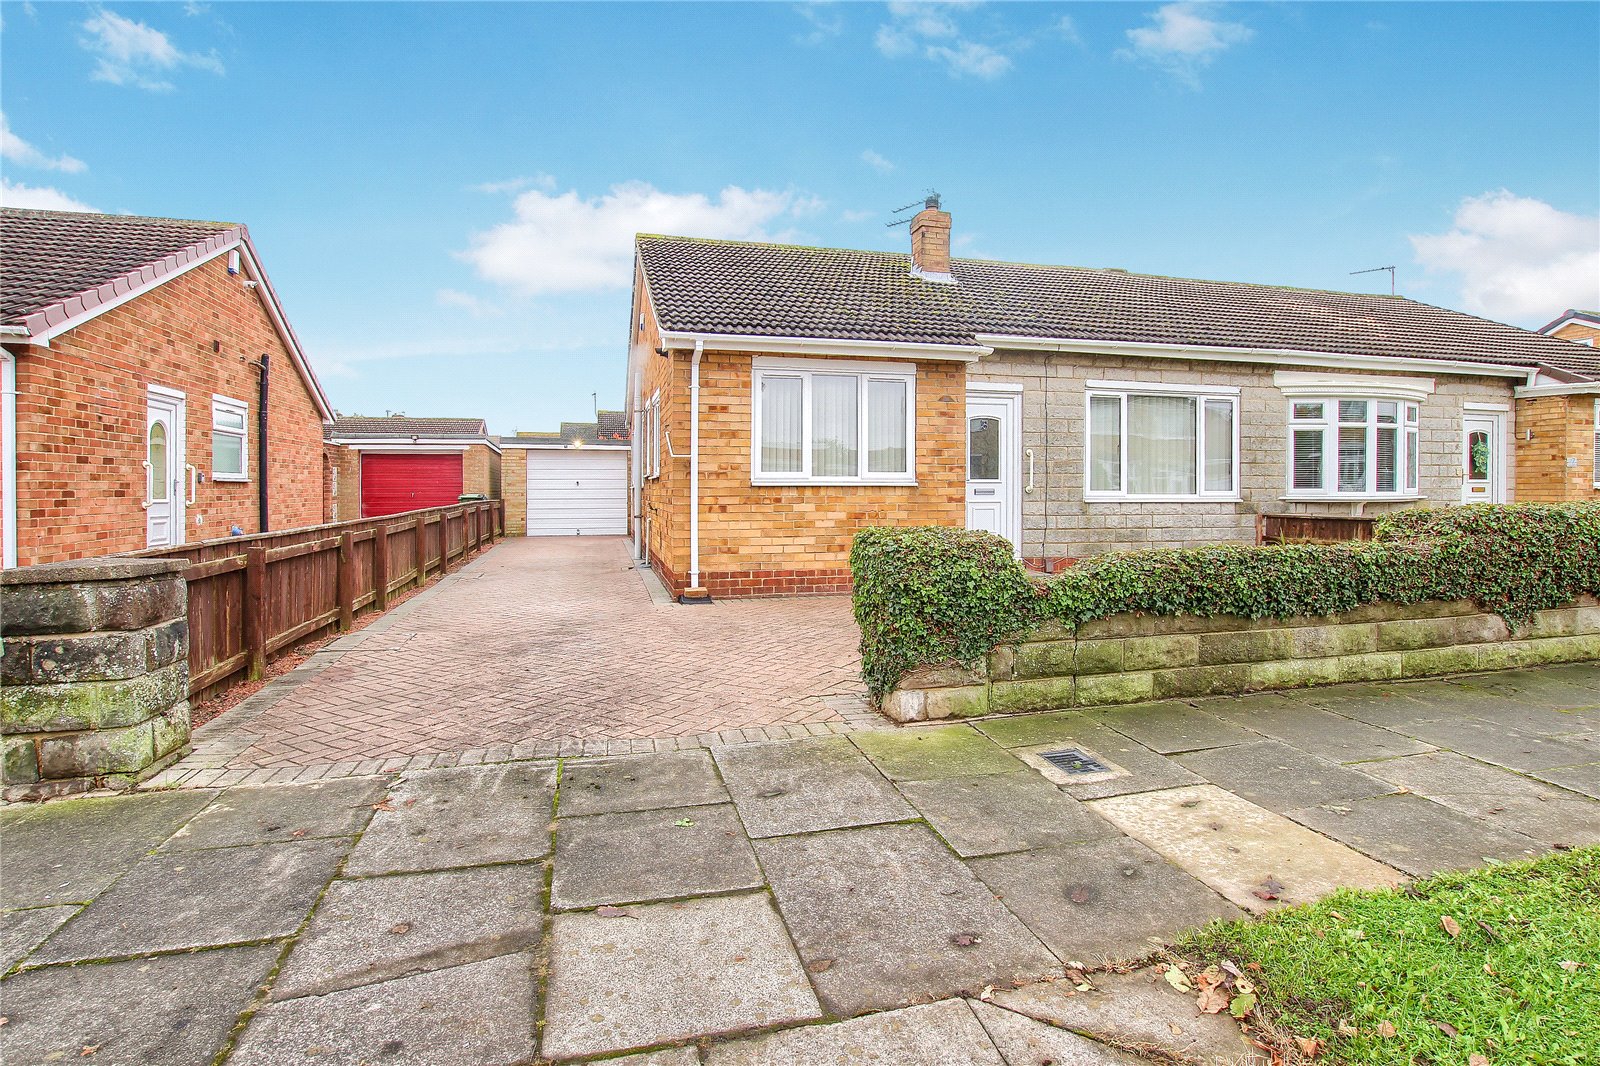 3 bed bungalow for sale in Burniston Drive, Thornaby - Property Image 1